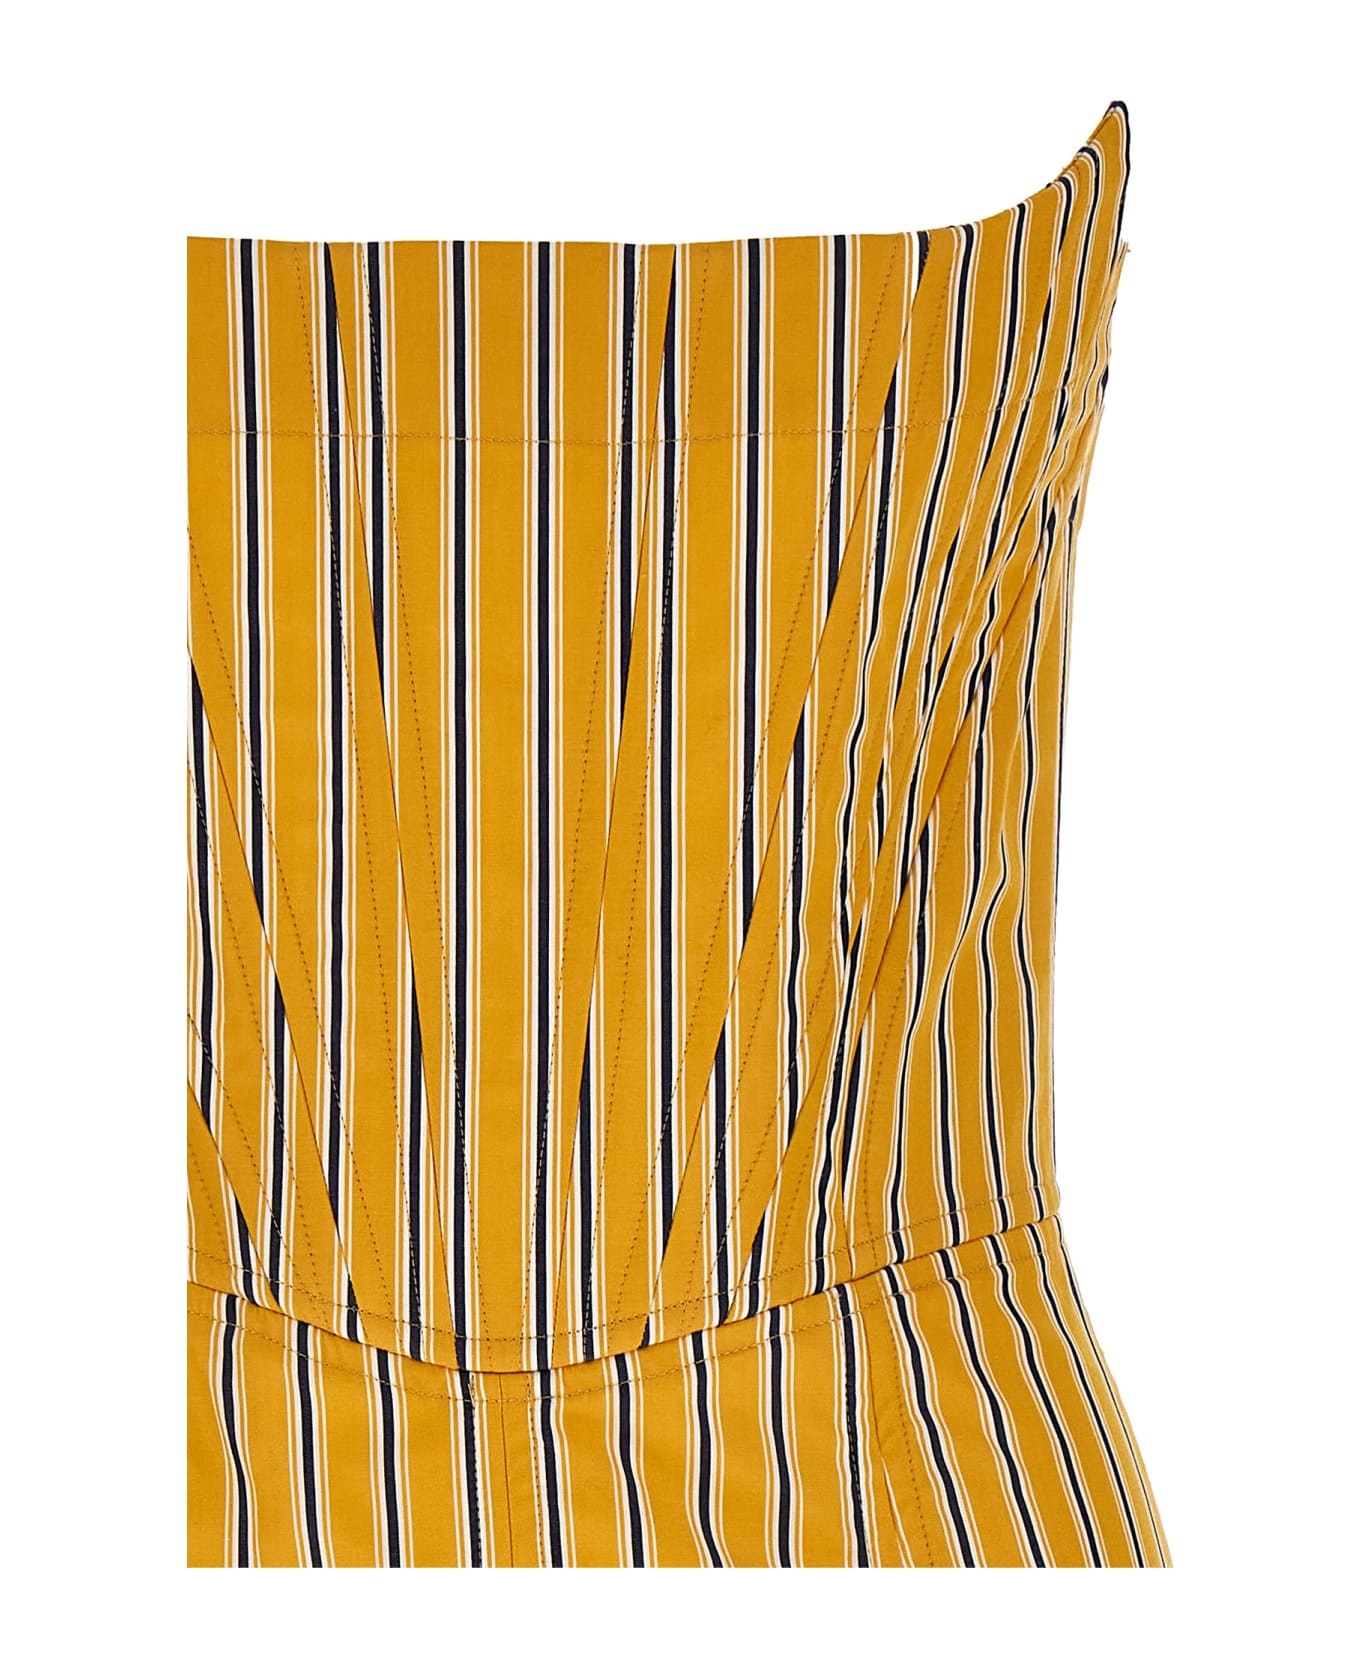 Dsquared2 Striped Corset Dress - YELLOW/RED